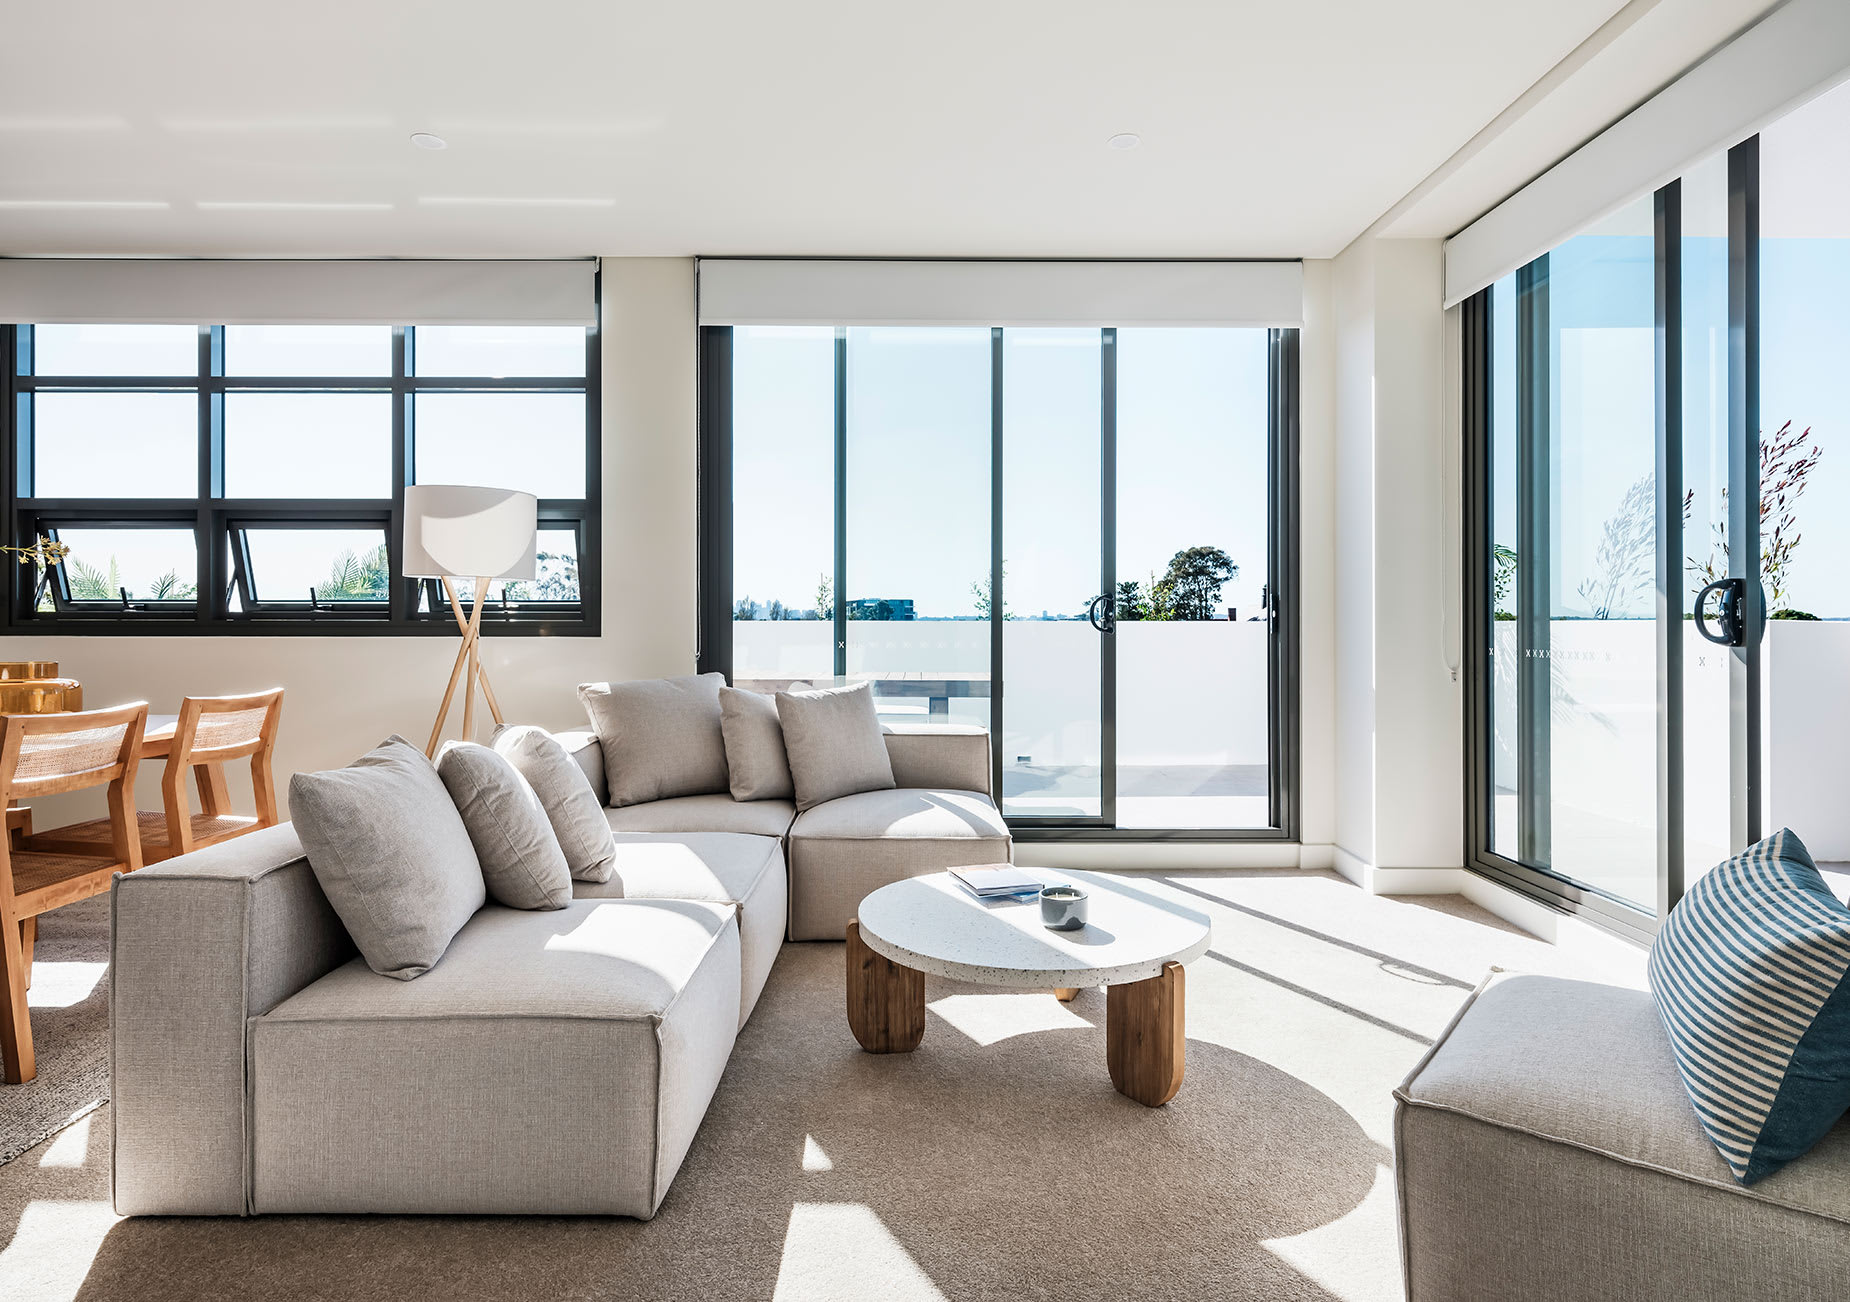 All about the views series two: The four best apartment projects in New South Wales with picture perfect panoramas